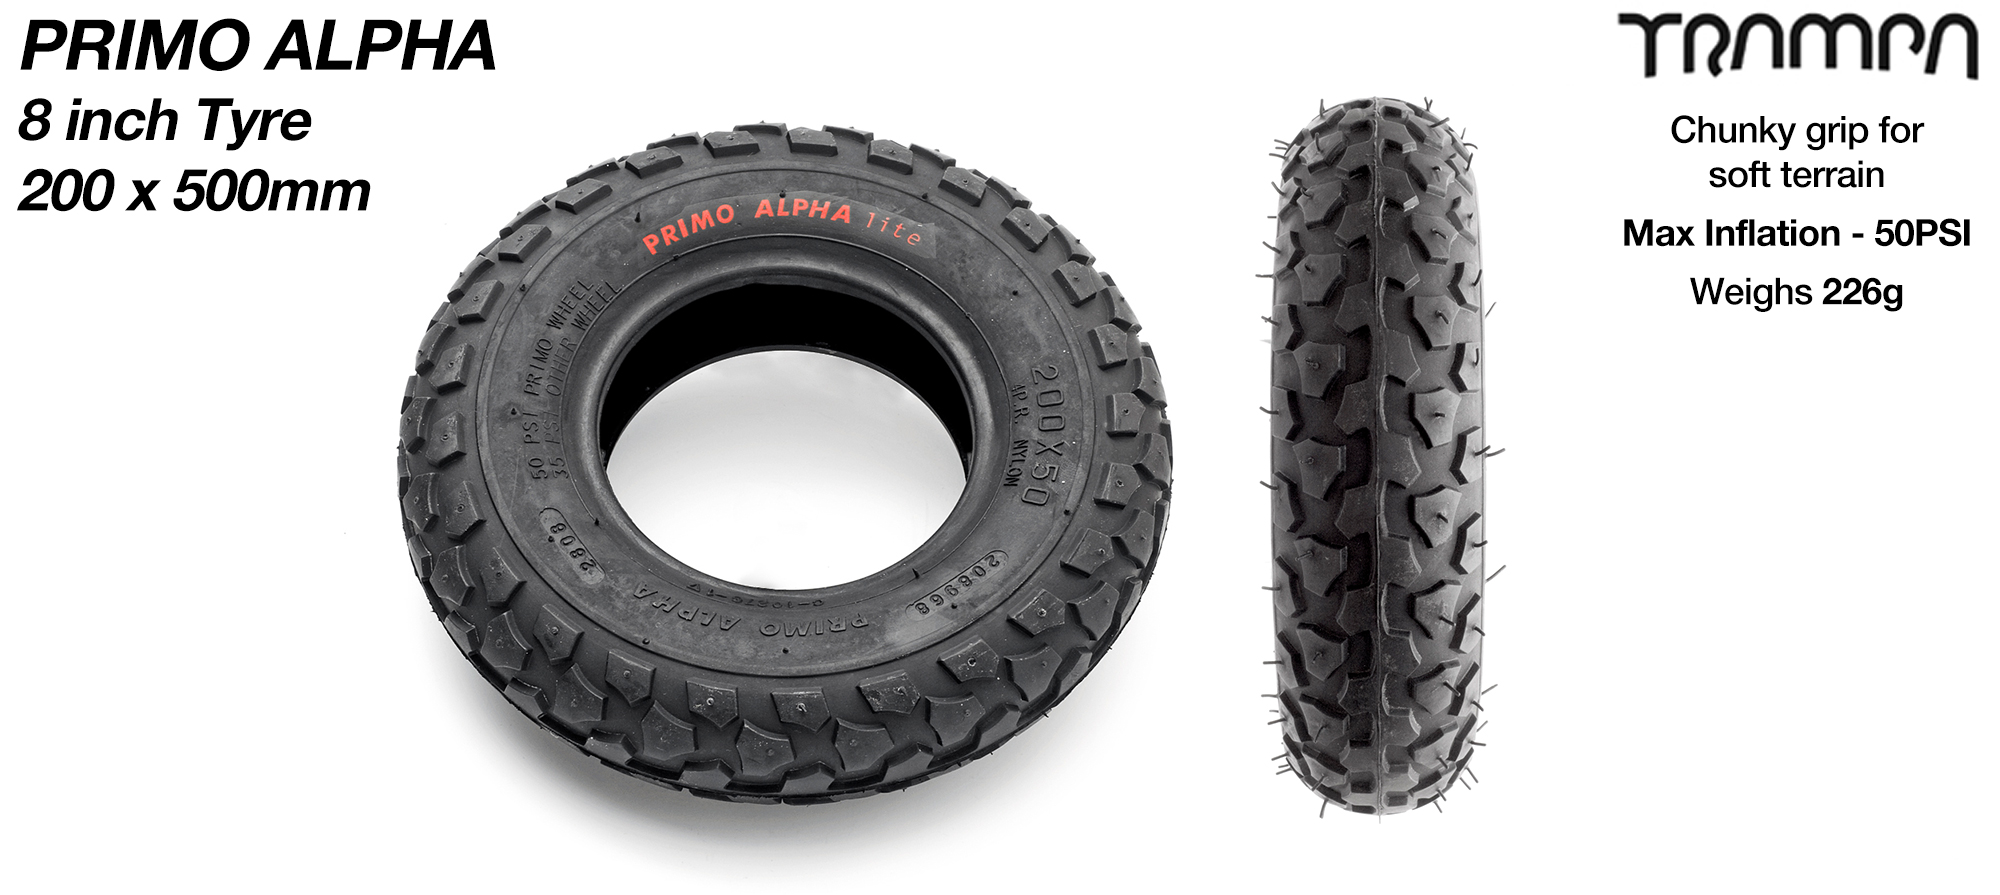 PRIMO ALPHA 8 inch Tyre measure 3.75x 2x 8 Inch or 200x50mm with 3.75 inch Rim fits all 3.75 inch Hubs